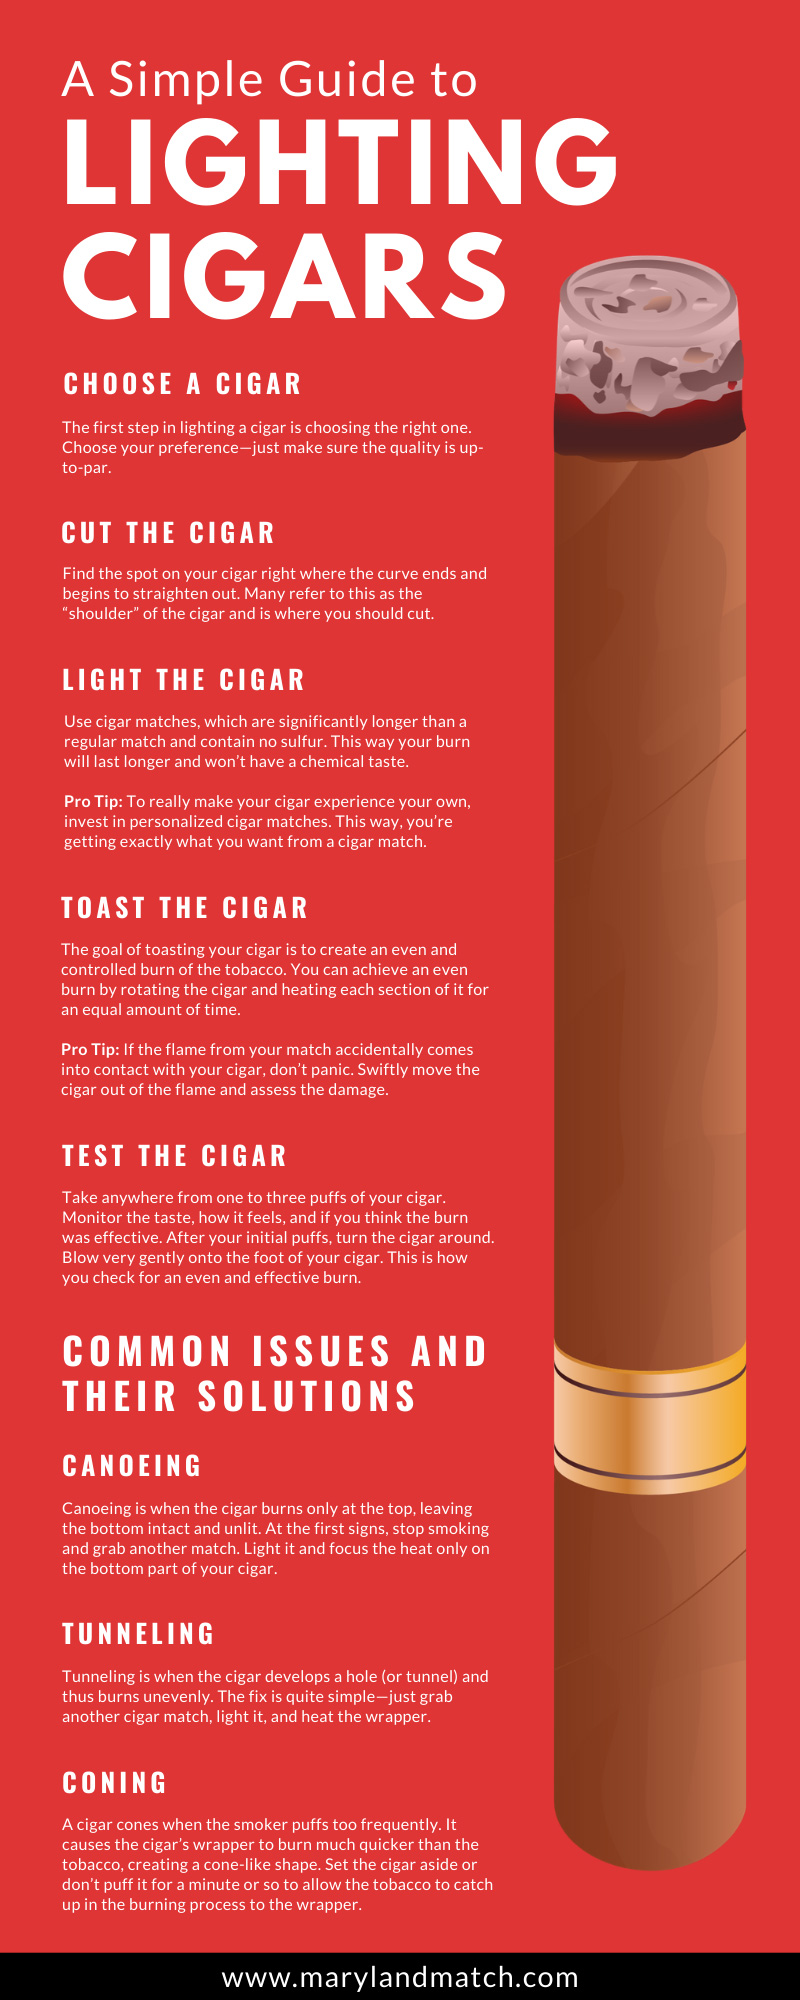 A Simple Guide to Lighting Cigars